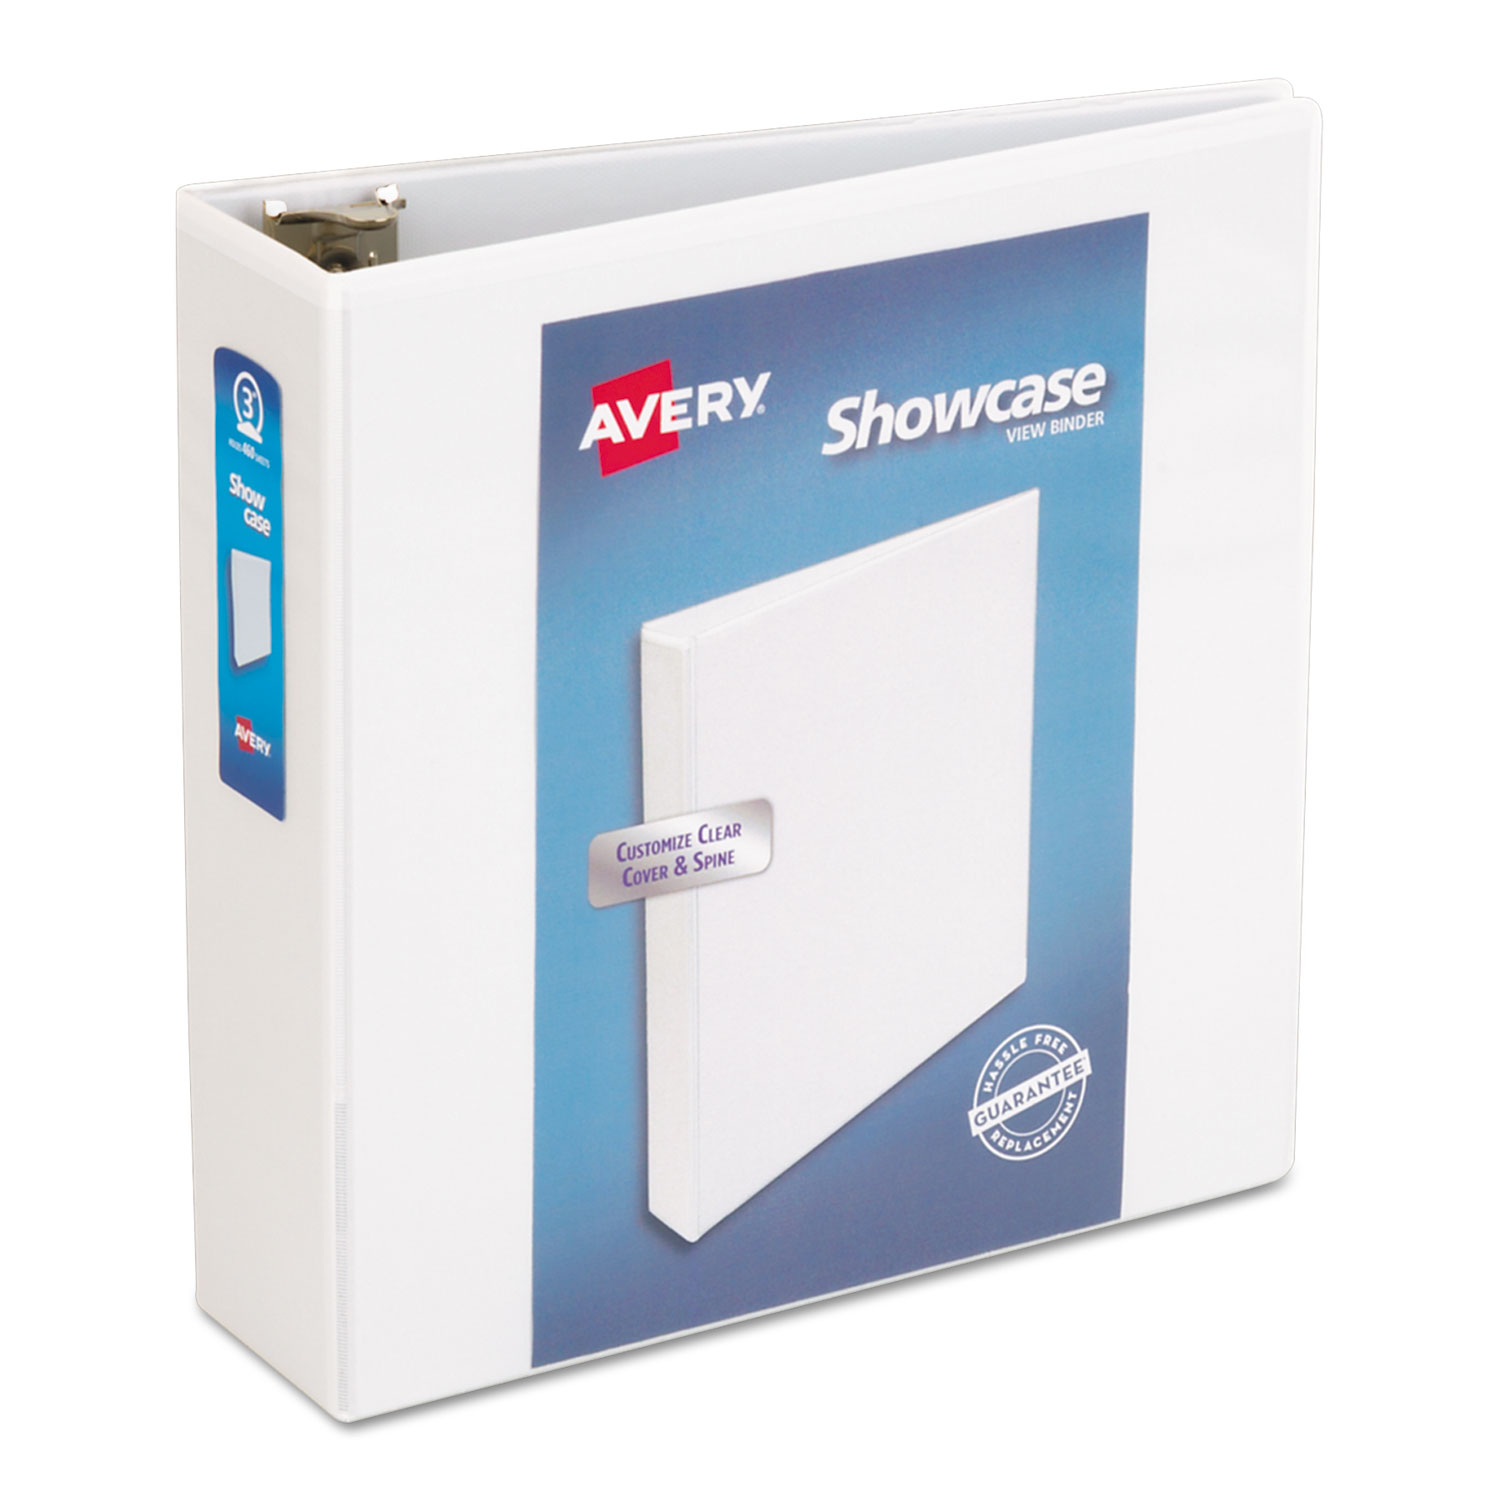  Avery 19751 Showcase Economy View Binder with Round Rings, 3 Rings, 3 Capacity, 11 x 8.5, White (AVE19751) 